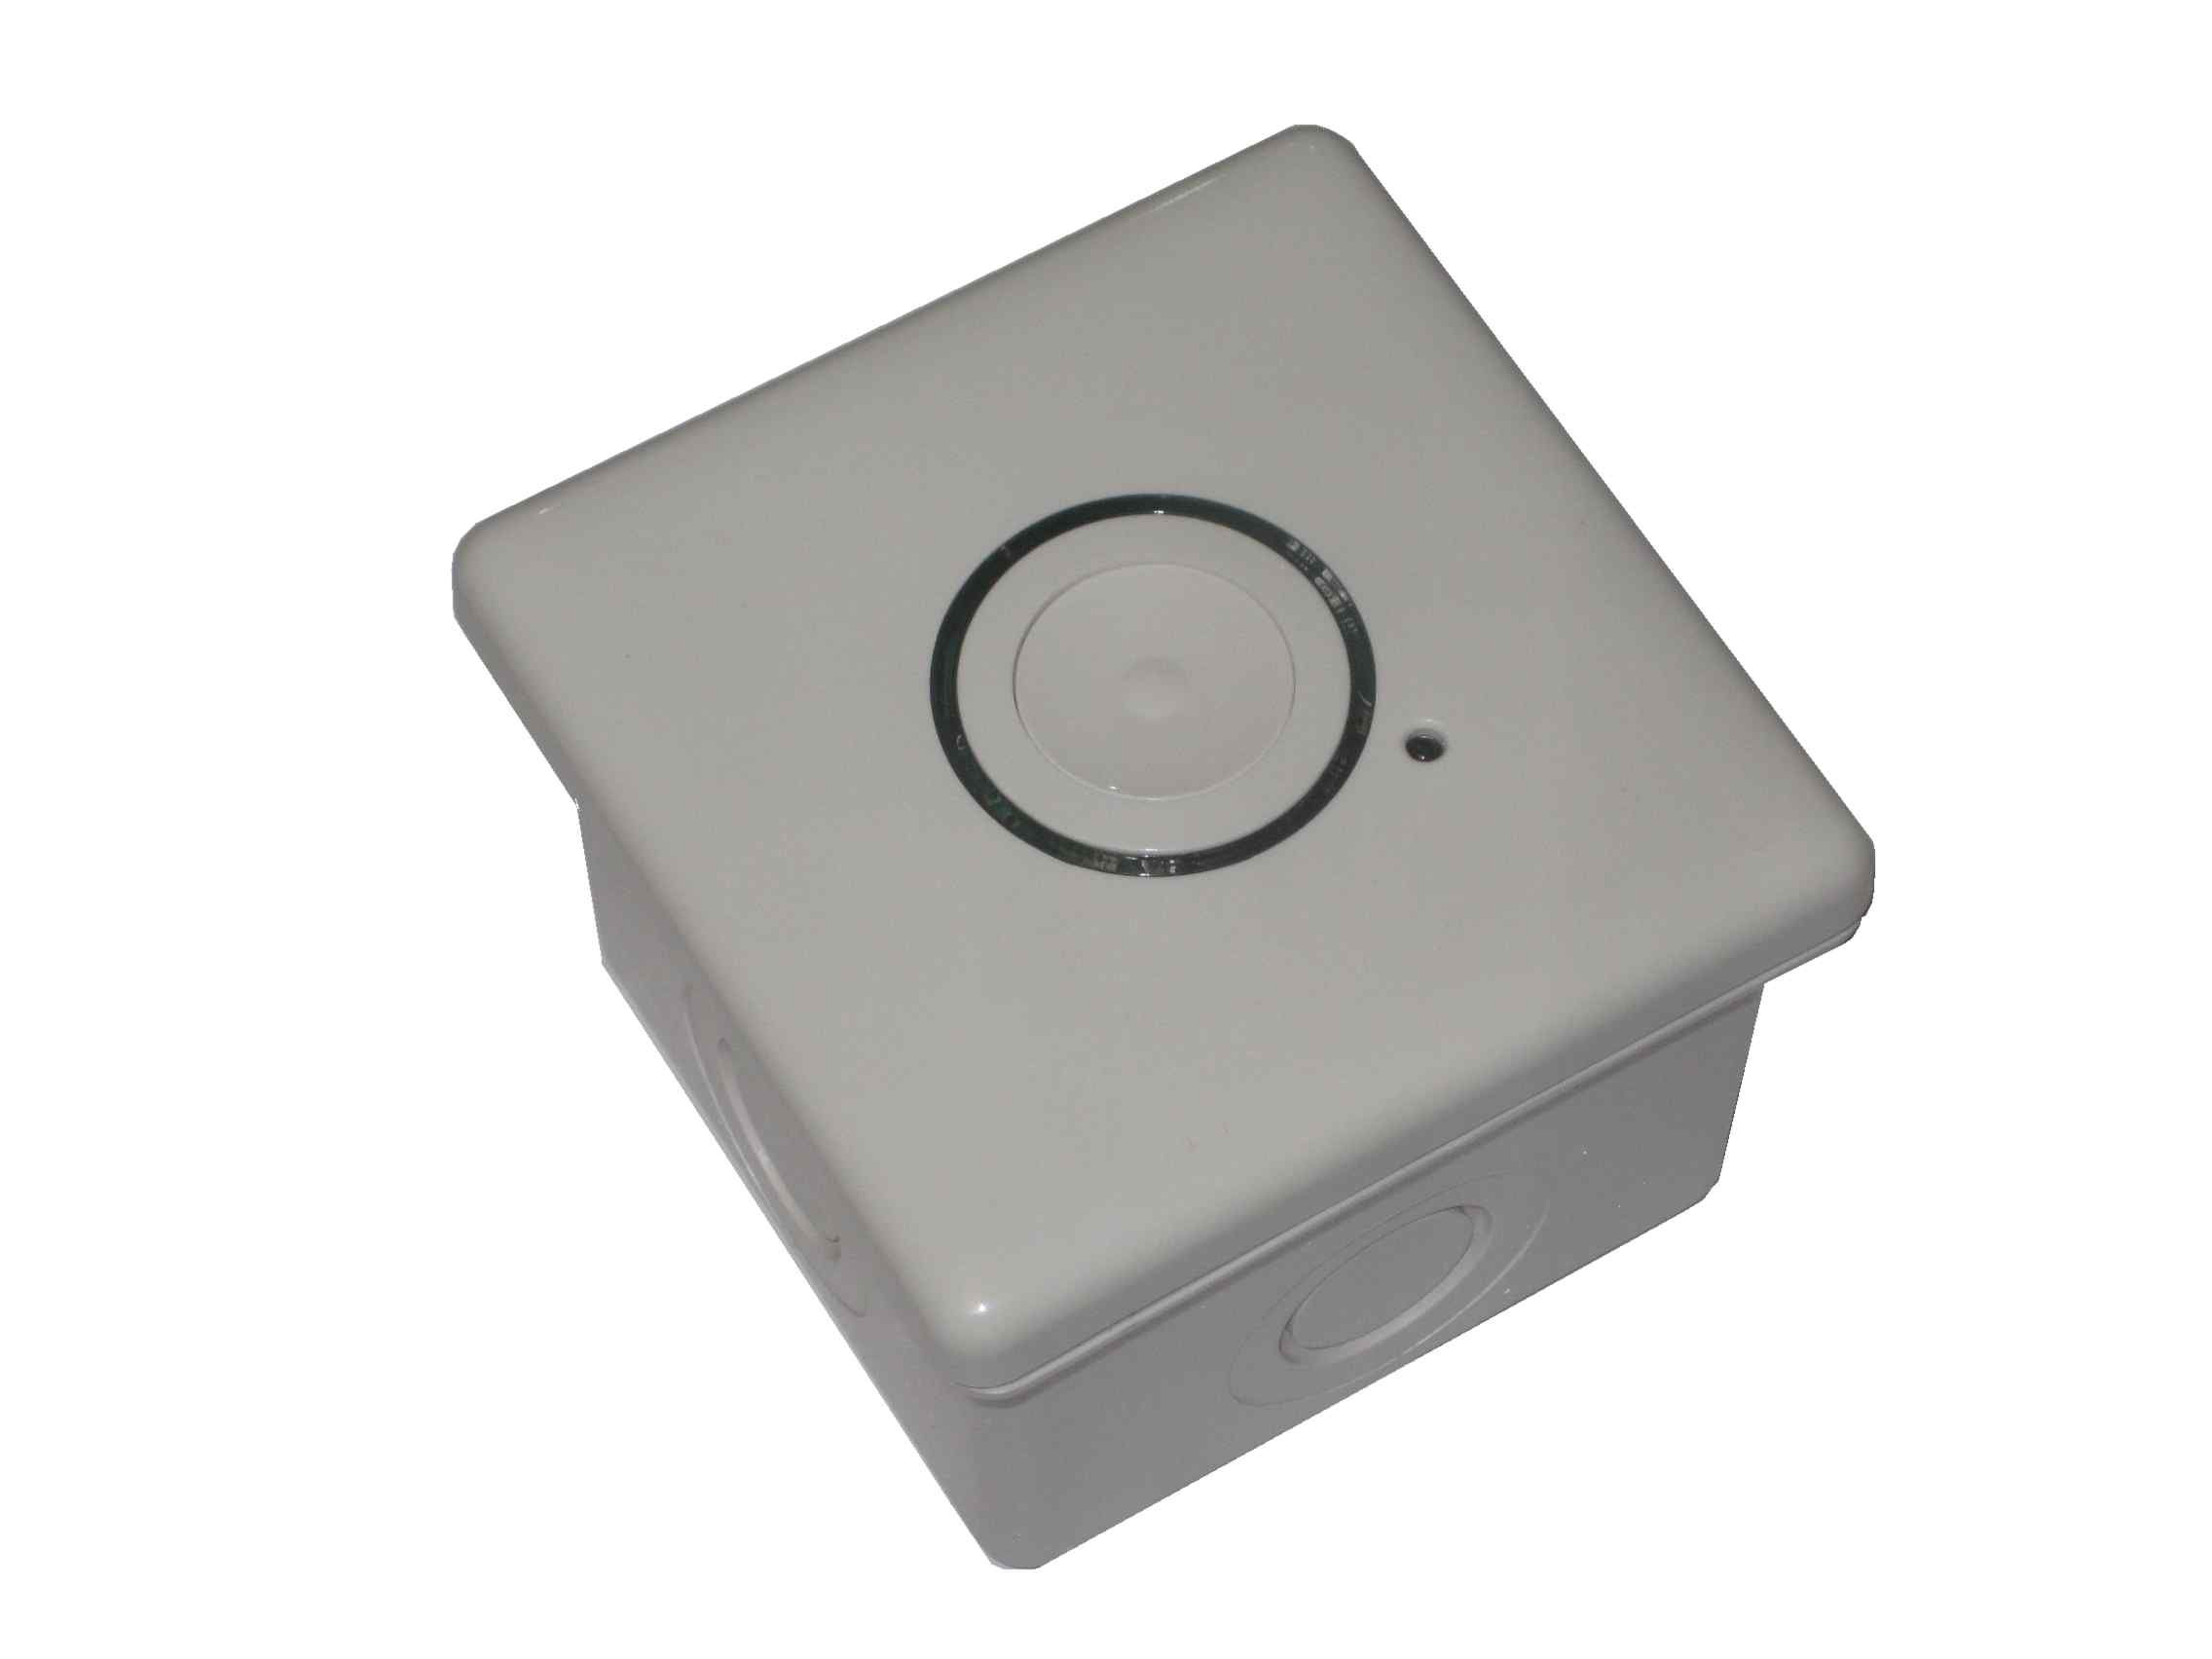 3kW Illuminated Time-out Switch 2 min to 2 hr delay